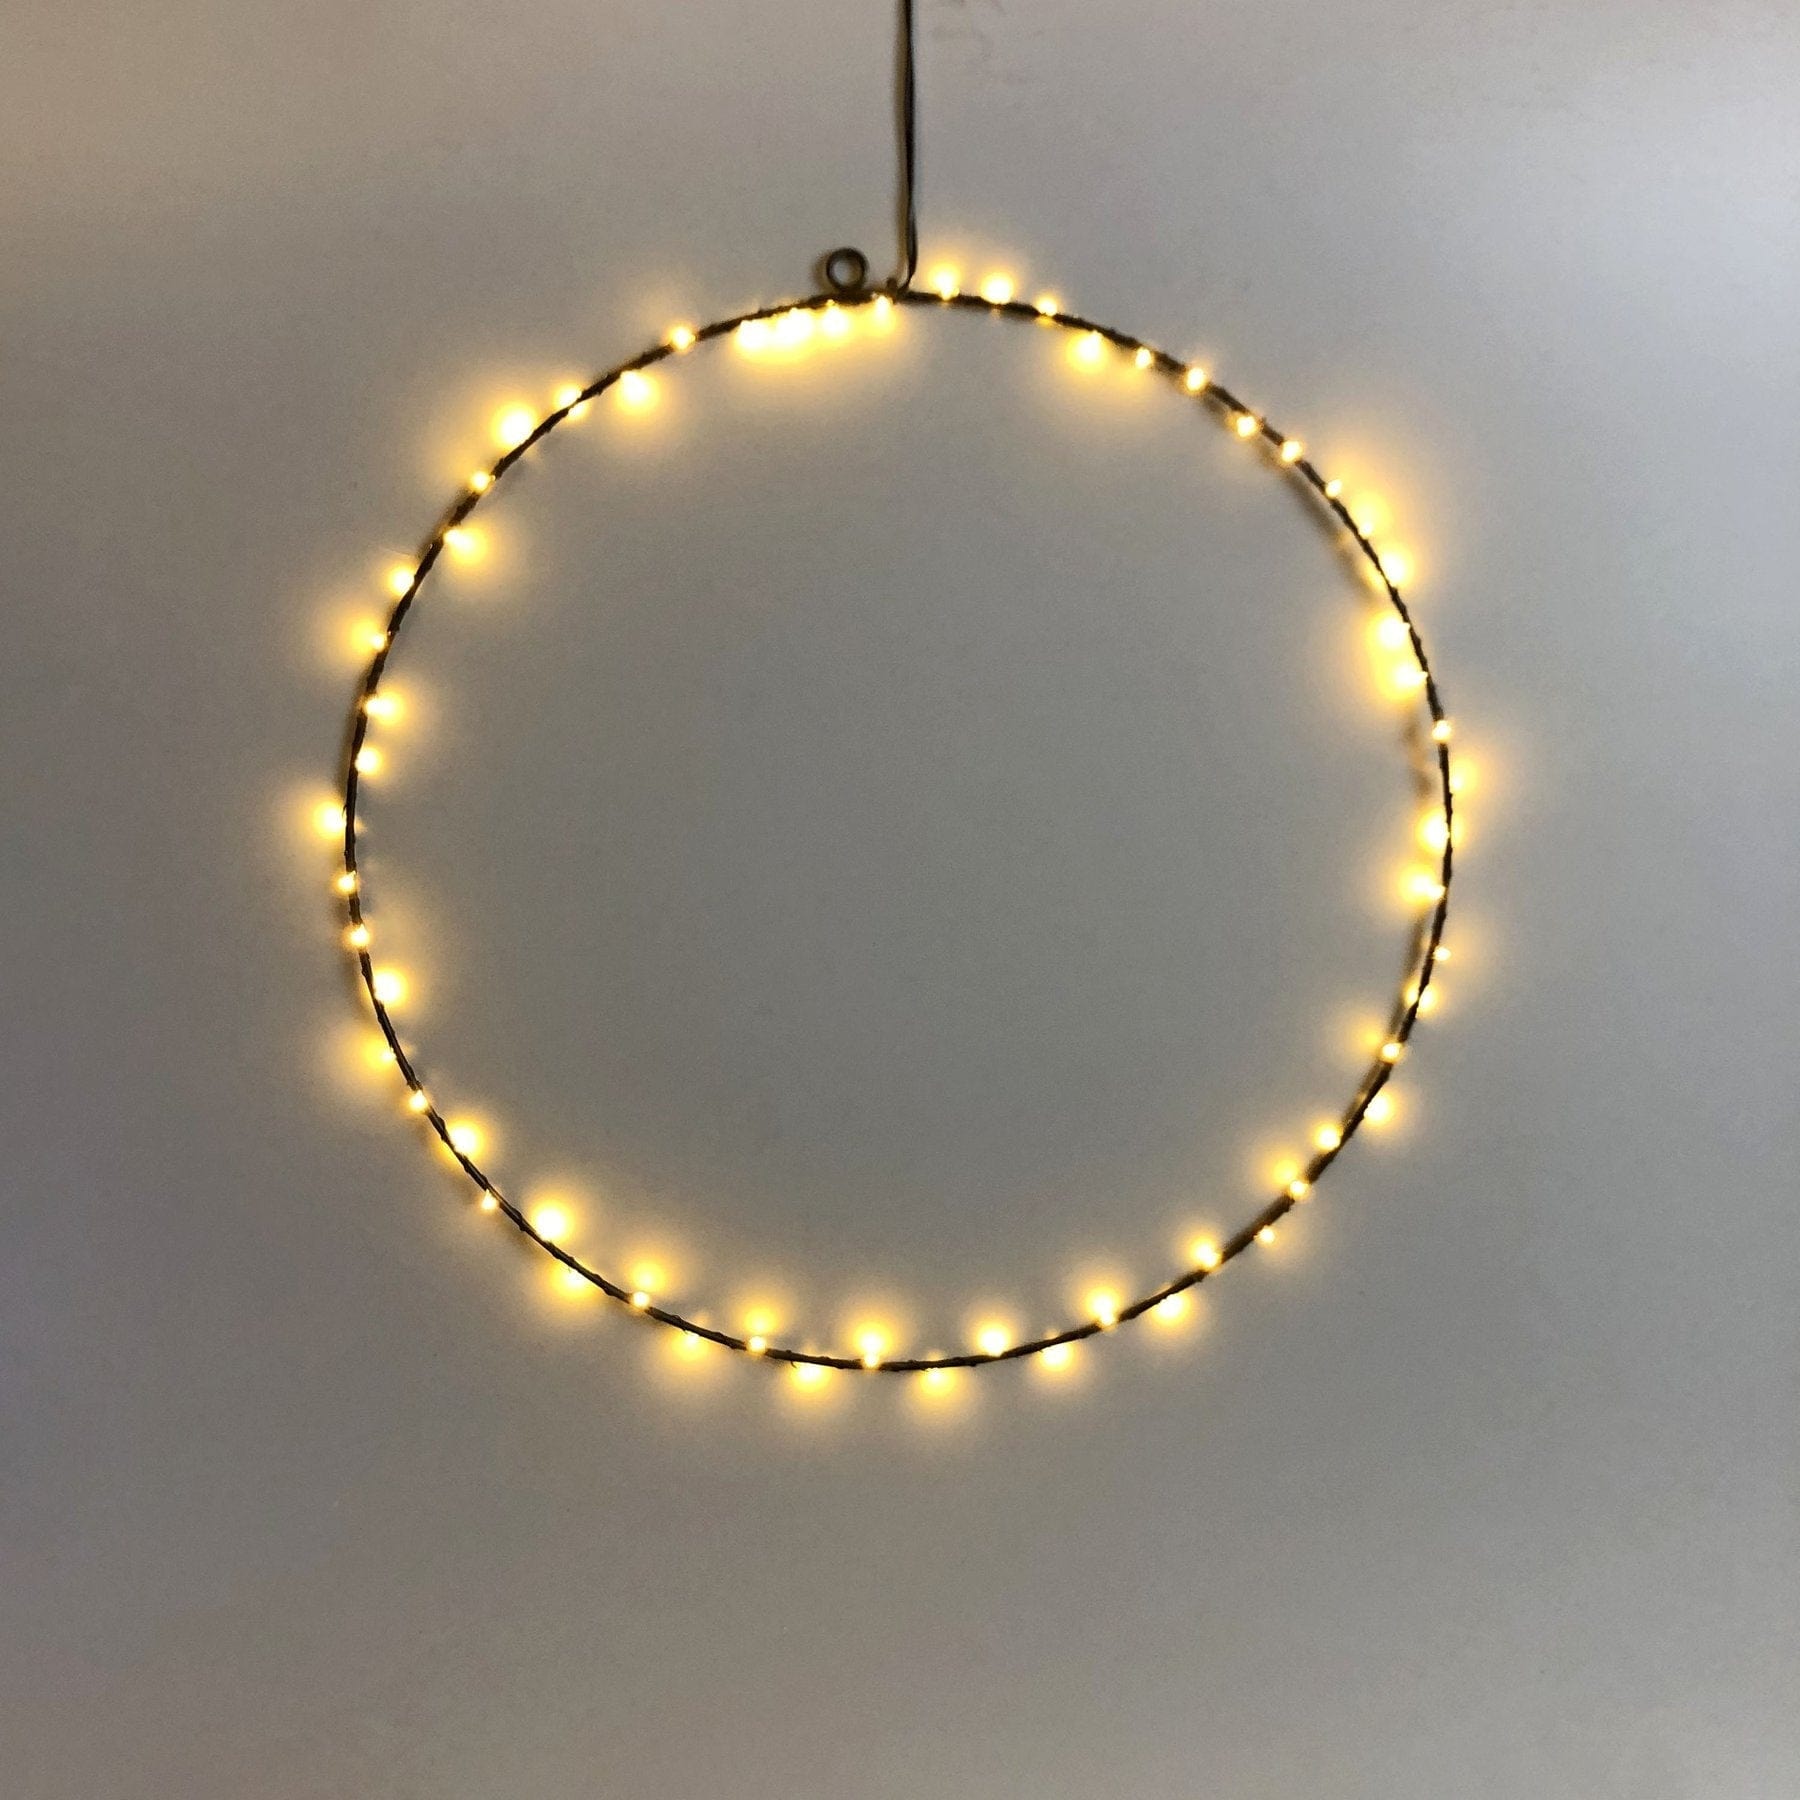 Lexi Lighting Christmas Ceiling&Wall Decoration Hanging Ring with Dual Colour LED - 2 Size Options